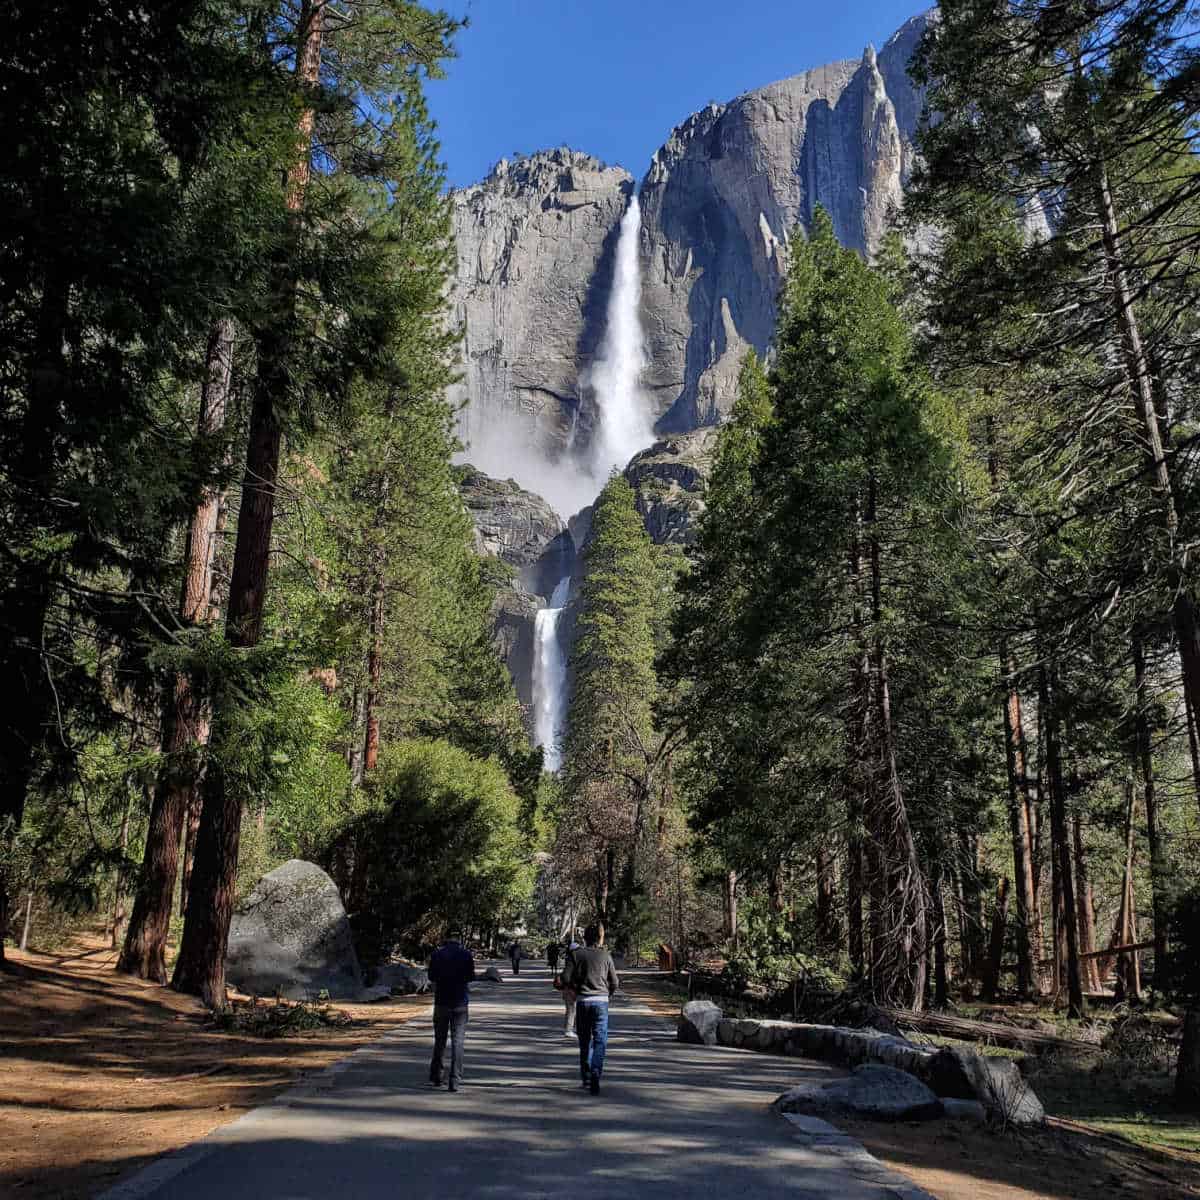 Walking the path to Lower Yosemite Falls with the falls strait in front of you